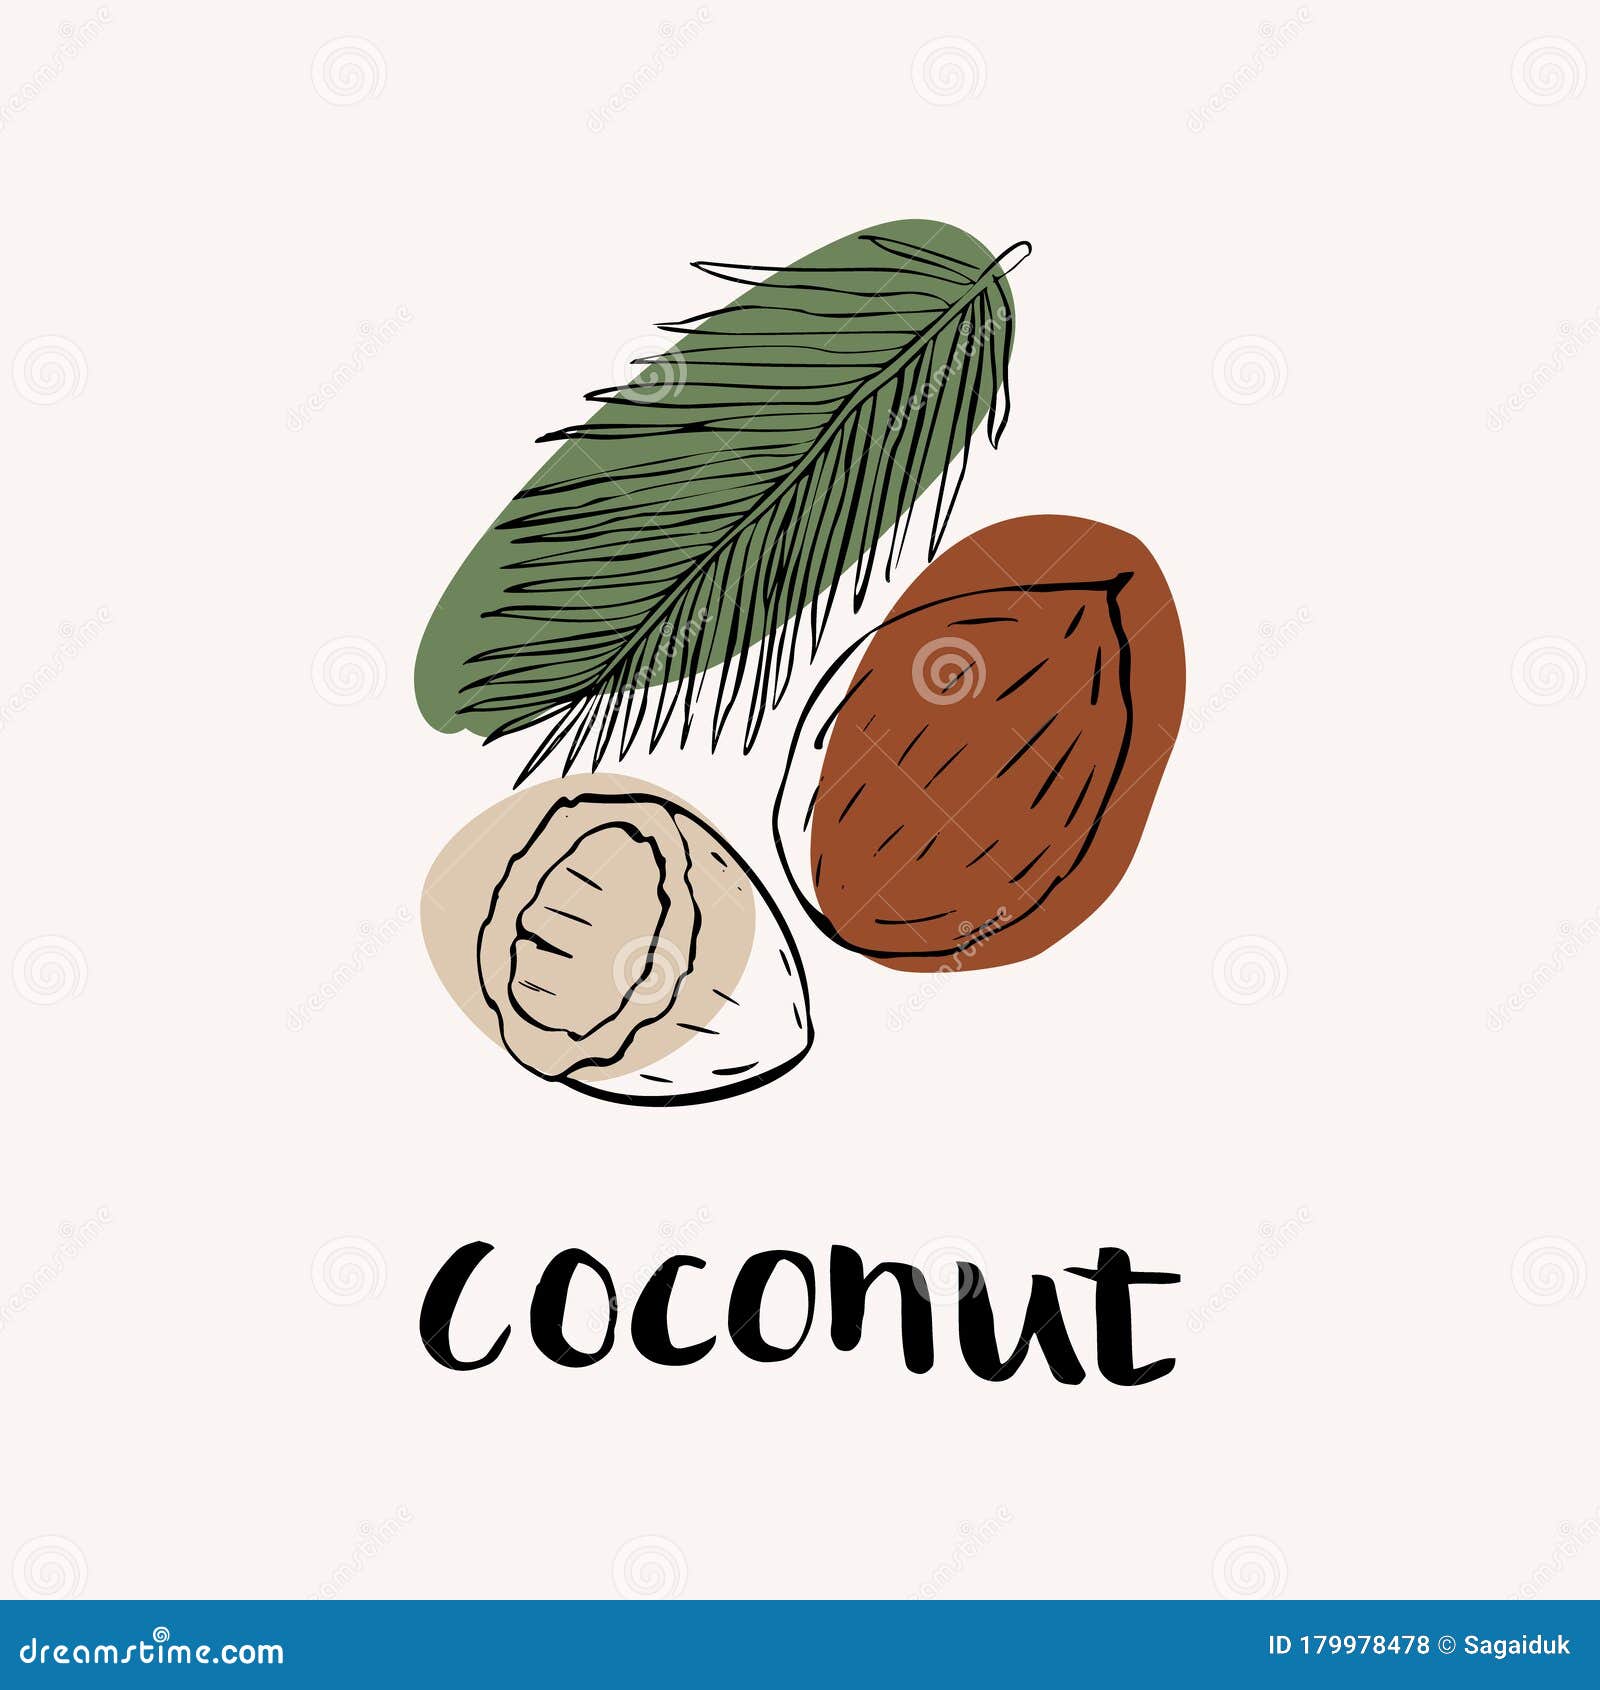 Coconut Black and White Vector Hand Draw Sketch with Colored Spots ...